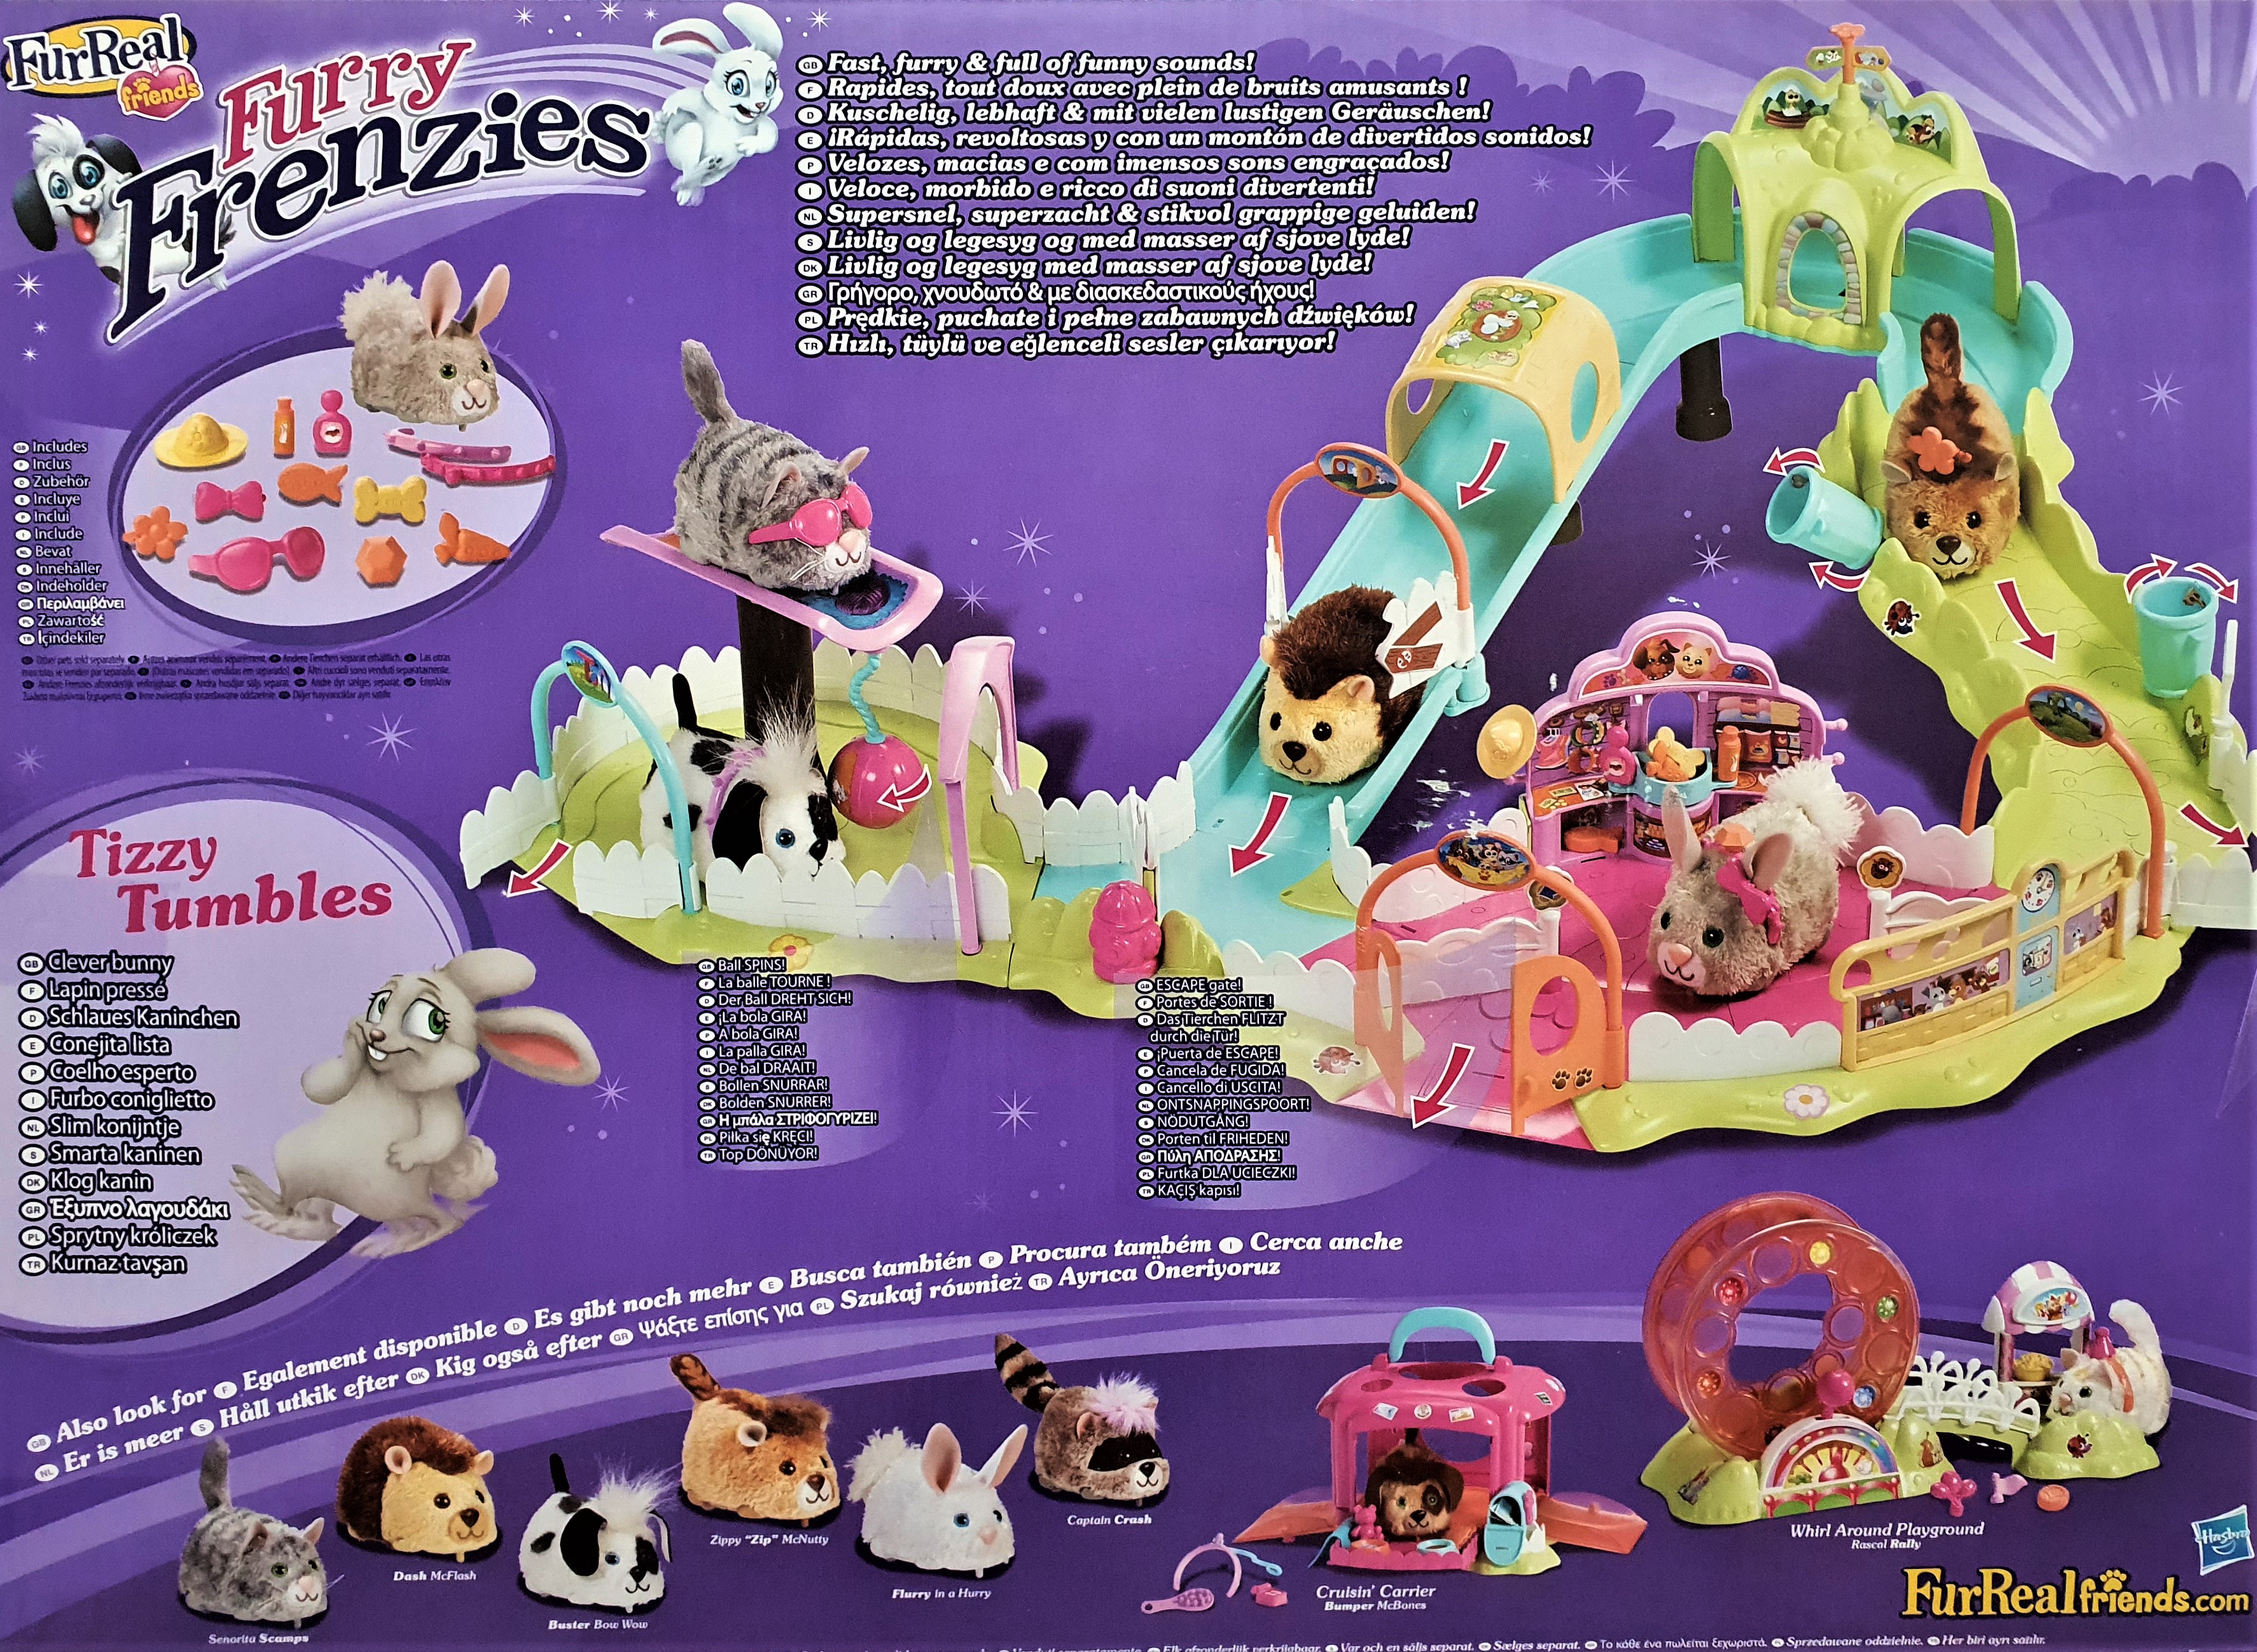 FURREAL FRIENDS FURRY FRENZIES SCOOT&SCURRY CITY TIZZY TUMBLES gt Christmas gift 